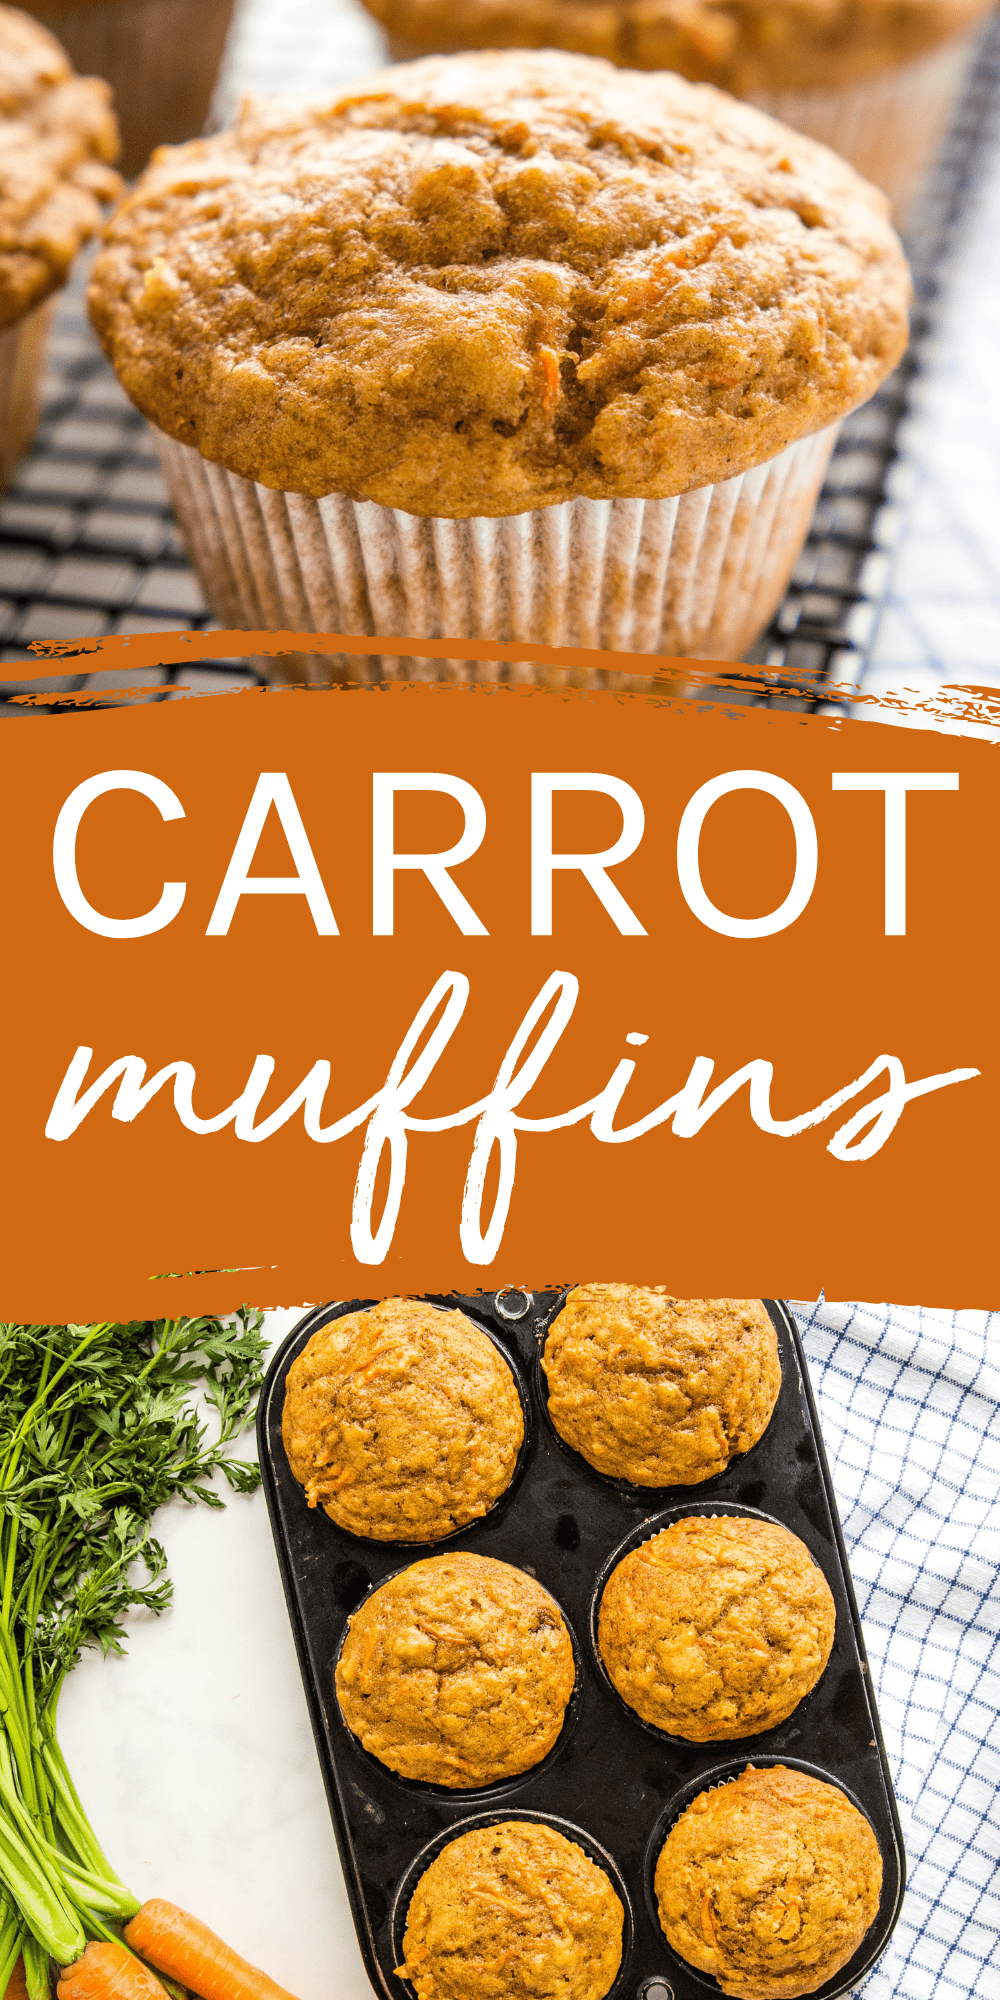 This Carrot Muffins recipe is the perfect snack for carrot cake lovers! Moist and fluffy muffins with fresh carrots, made in one bowl! via @busybakerblog